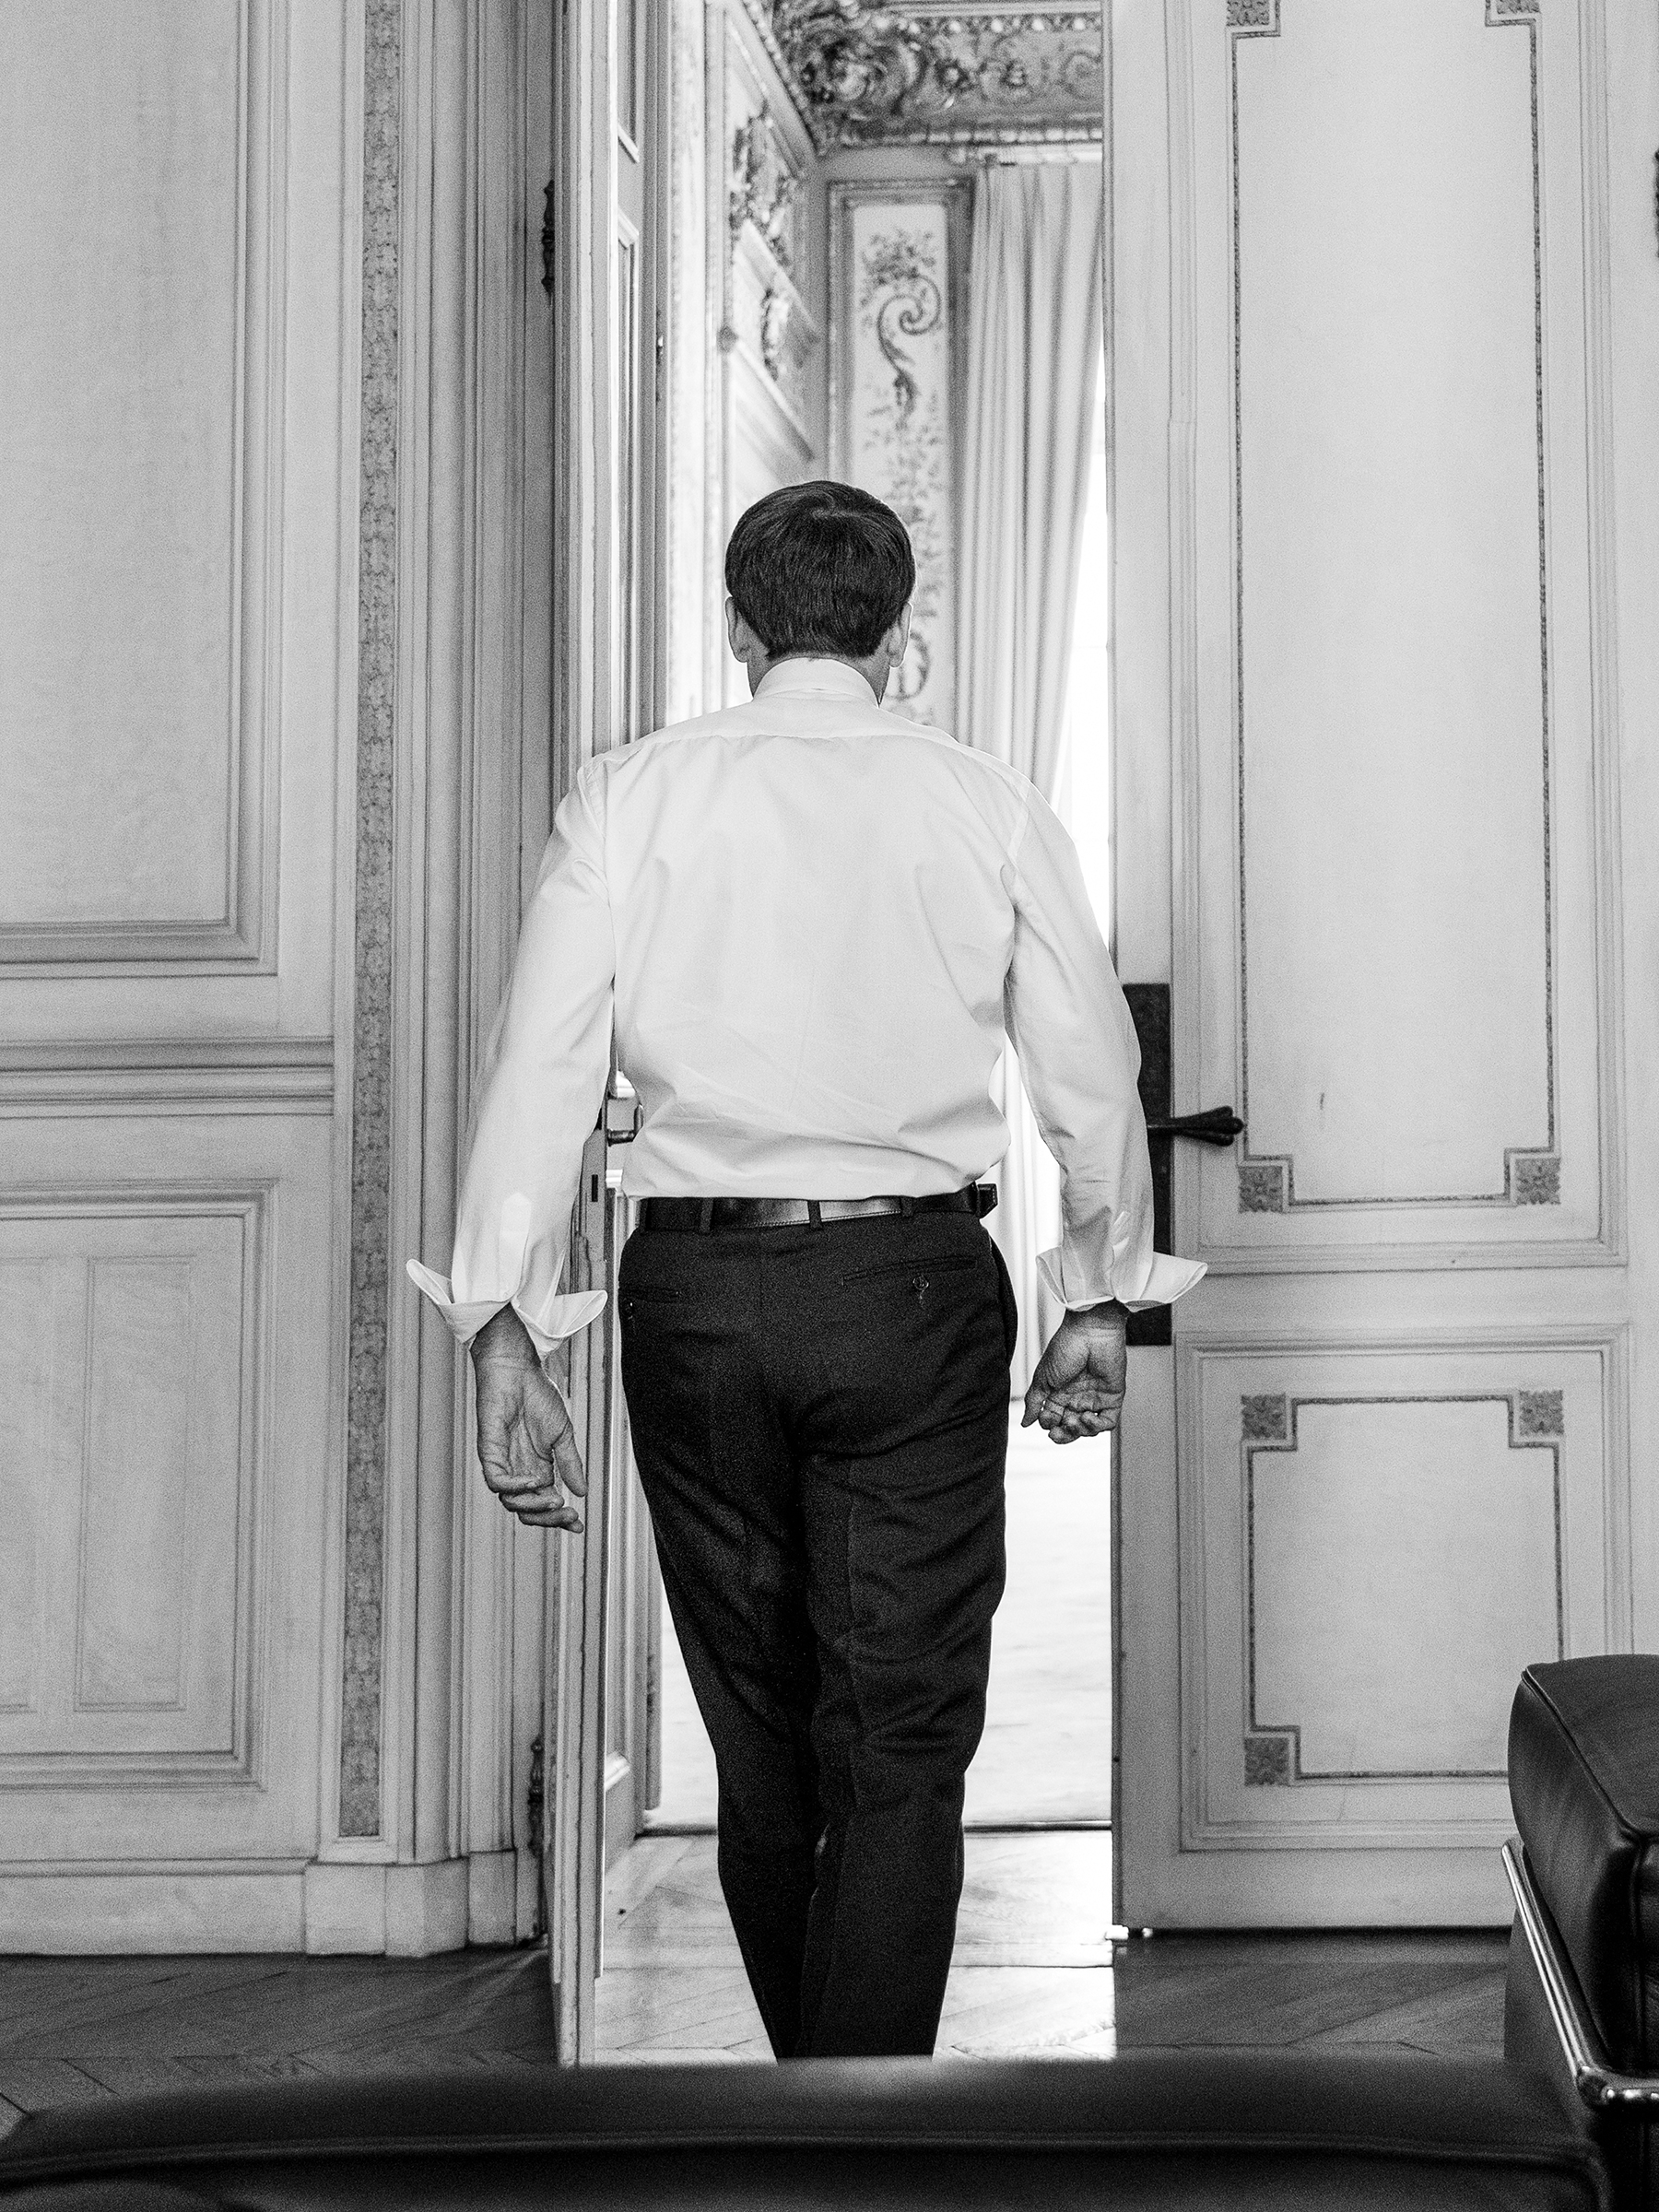 Macron steps out of a high-level meeting in the Élysée Palace in Paris on Sept. 9